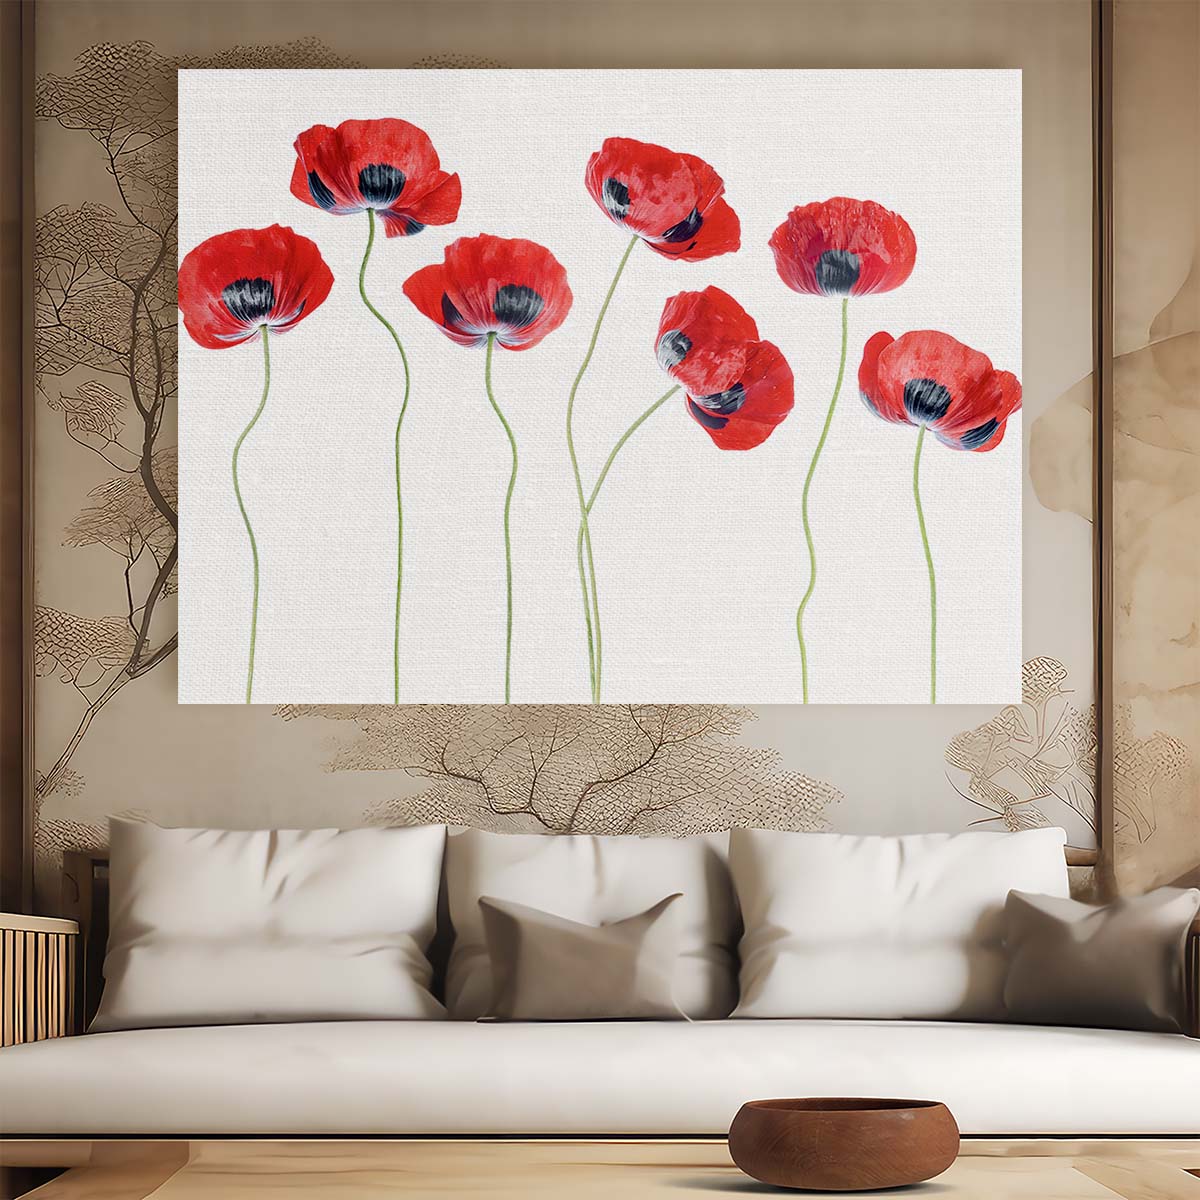 Minimalist Red Poppy Floral Botanical Wall Art by Luxuriance Designs. Made in USA.